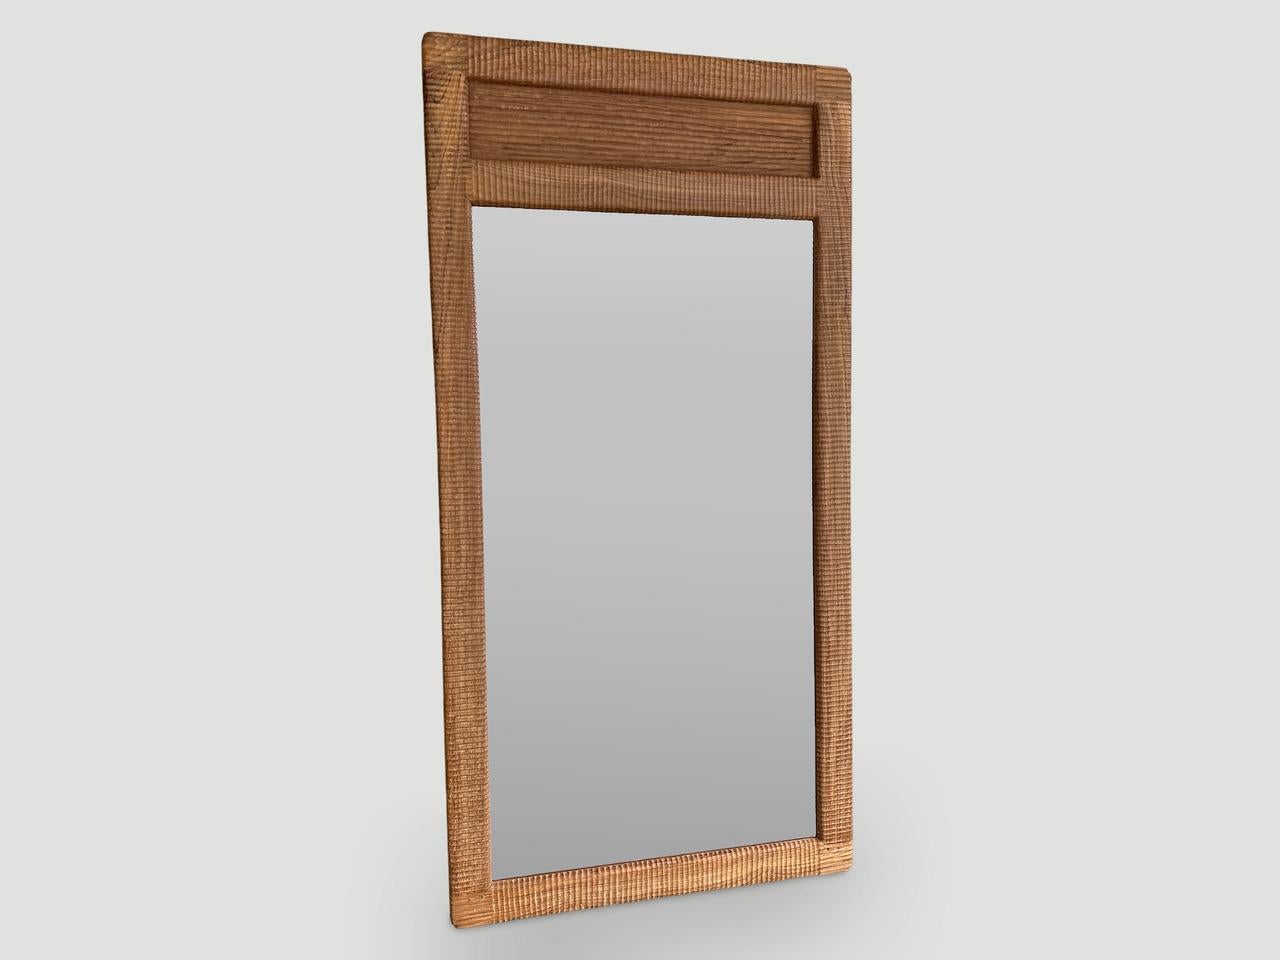 Andrianna Shamaris Minimalist Hand Carved Teak Wood Mirror In Excellent Condition For Sale In New York, NY